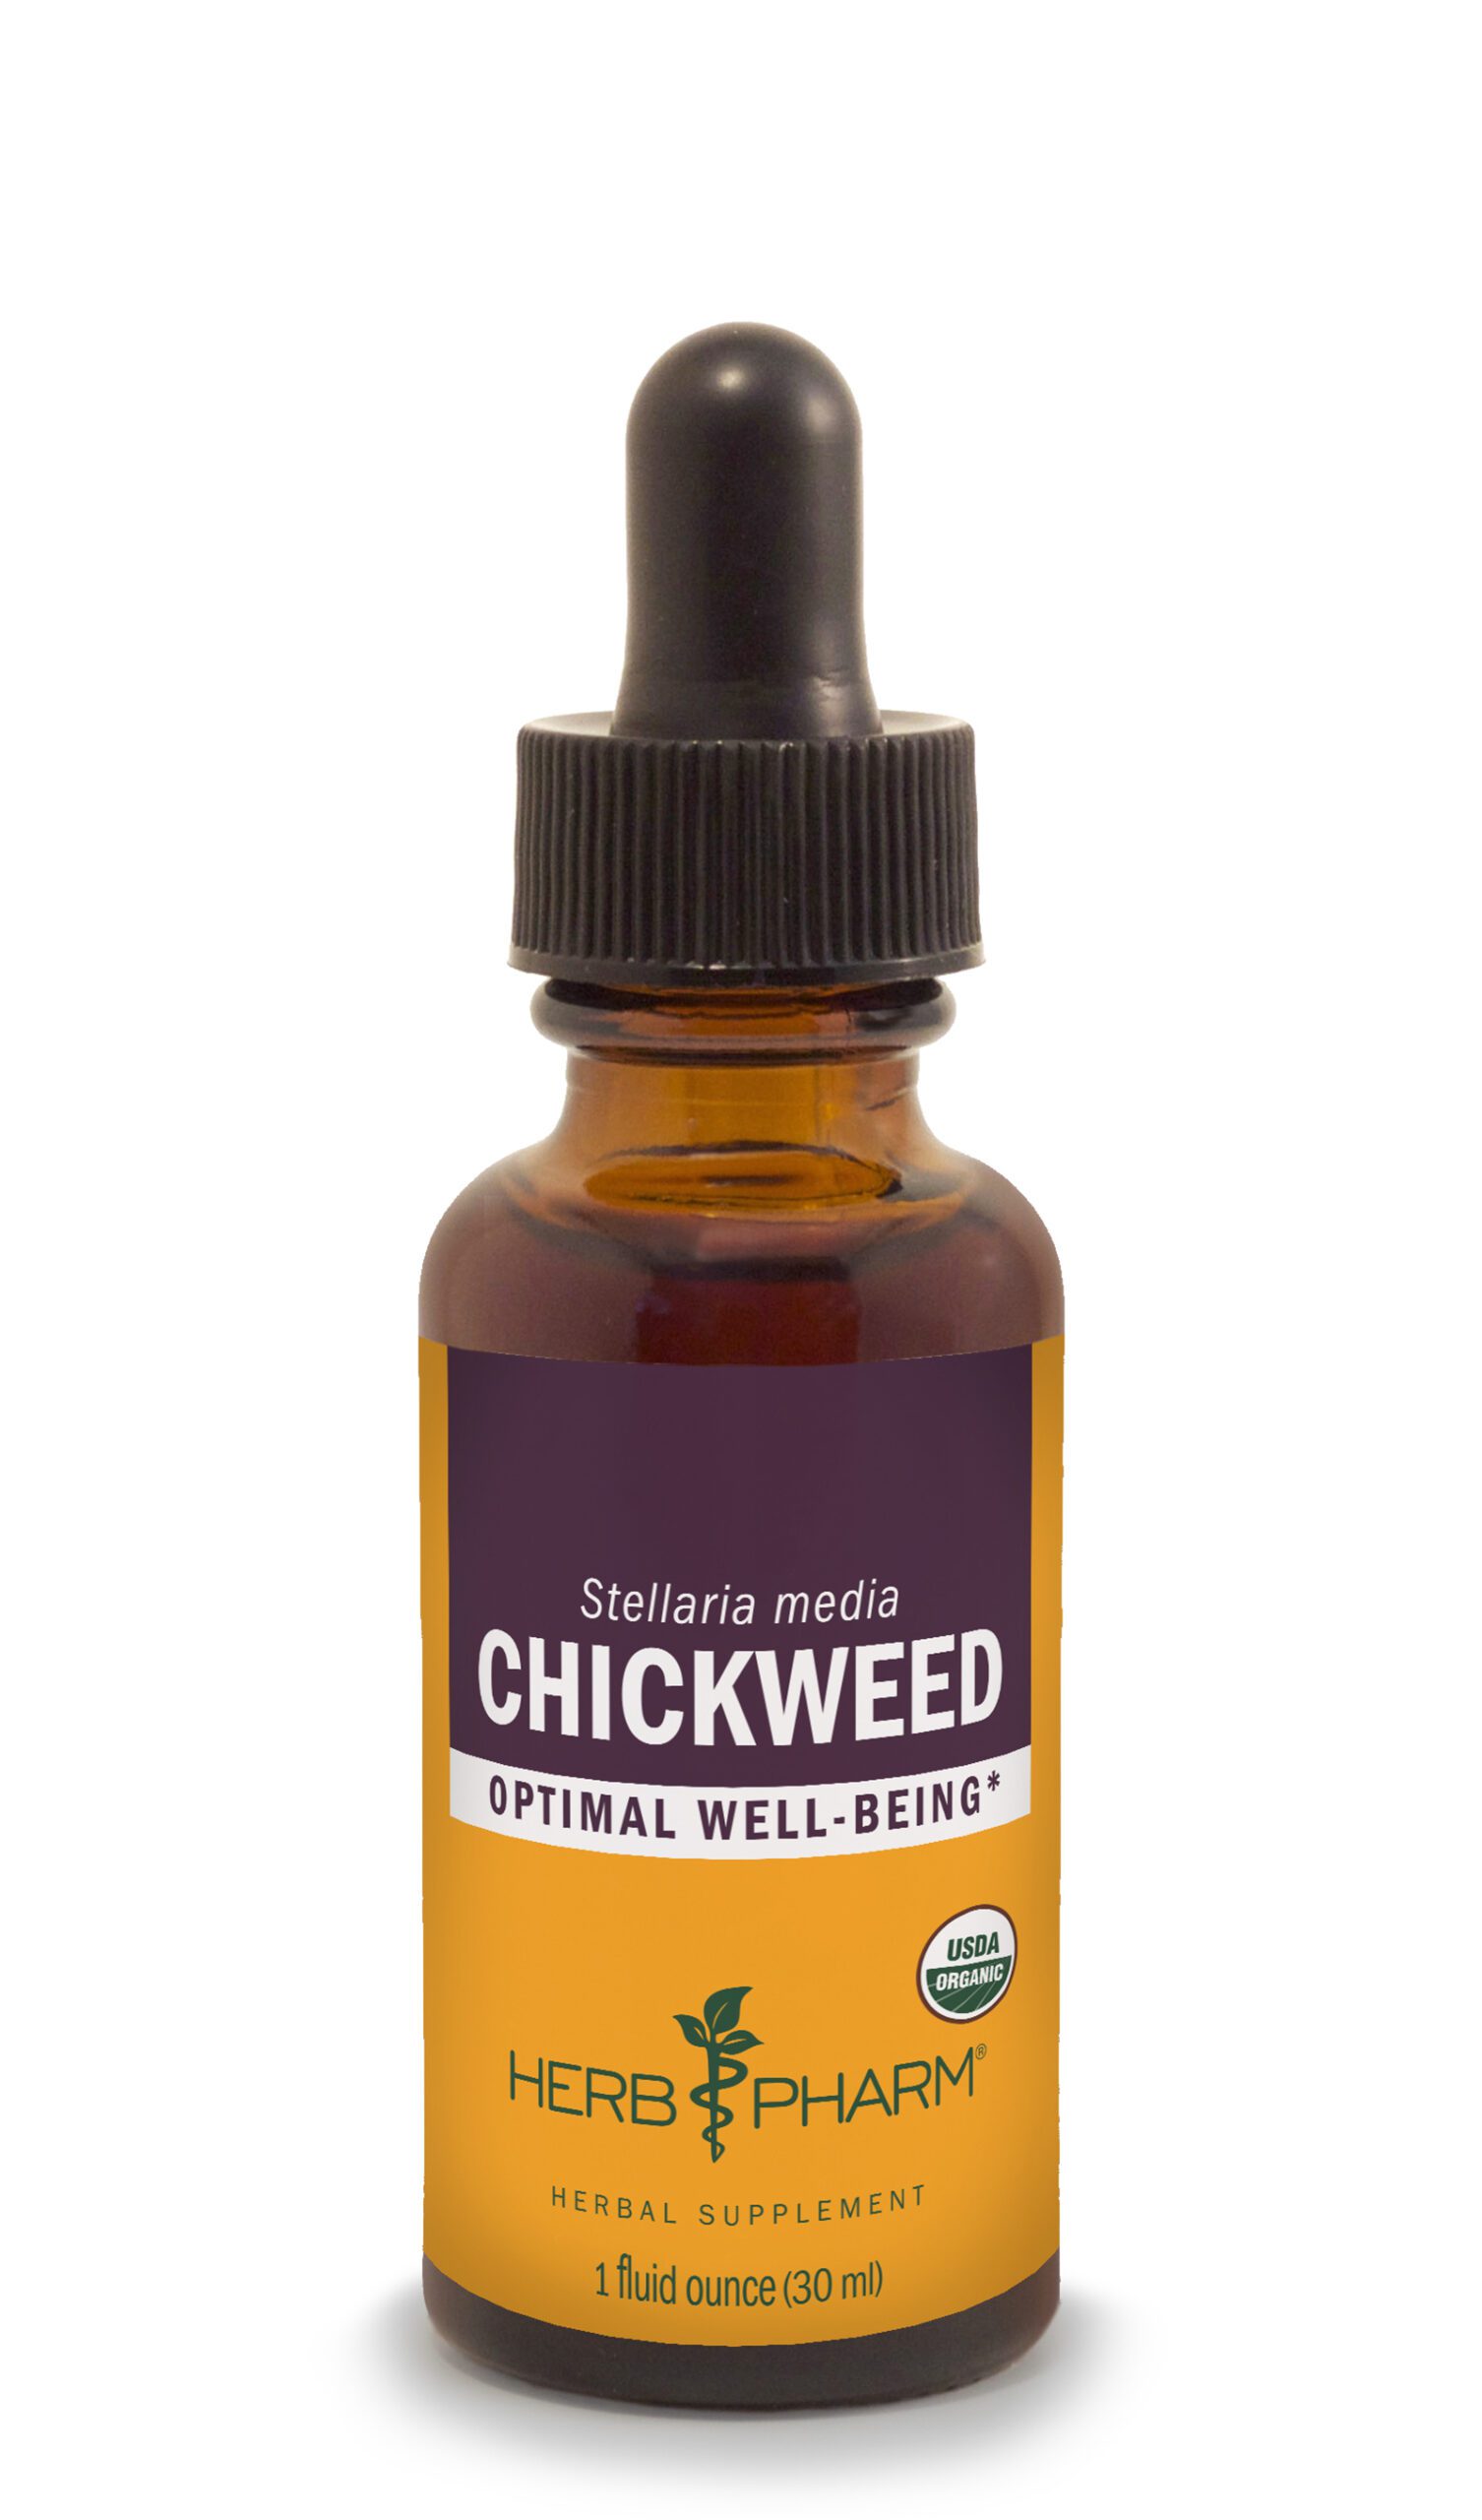 Product Listing Image for Herb Pharm Chickweed Tincture 1oz